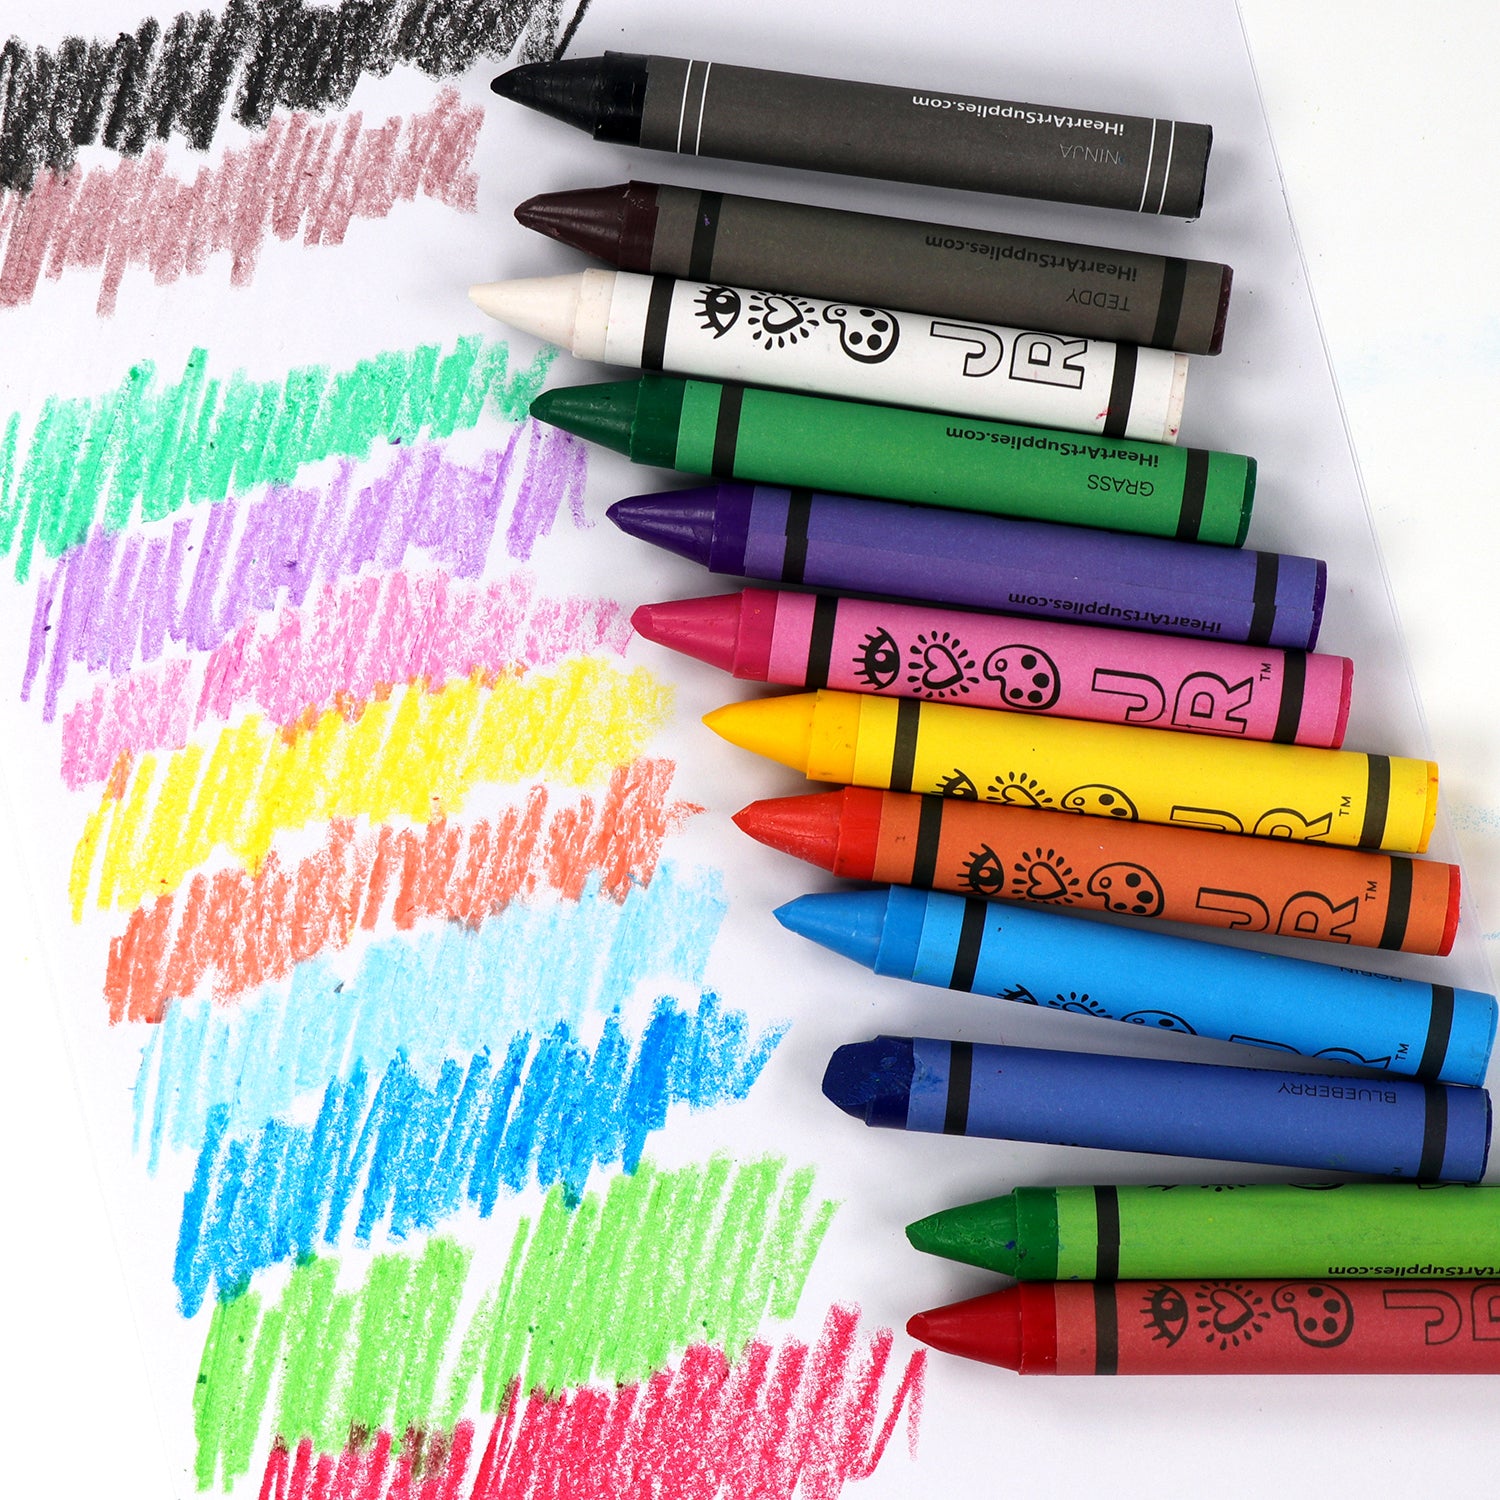 OOLY Thick neon crayons Jumbo brights